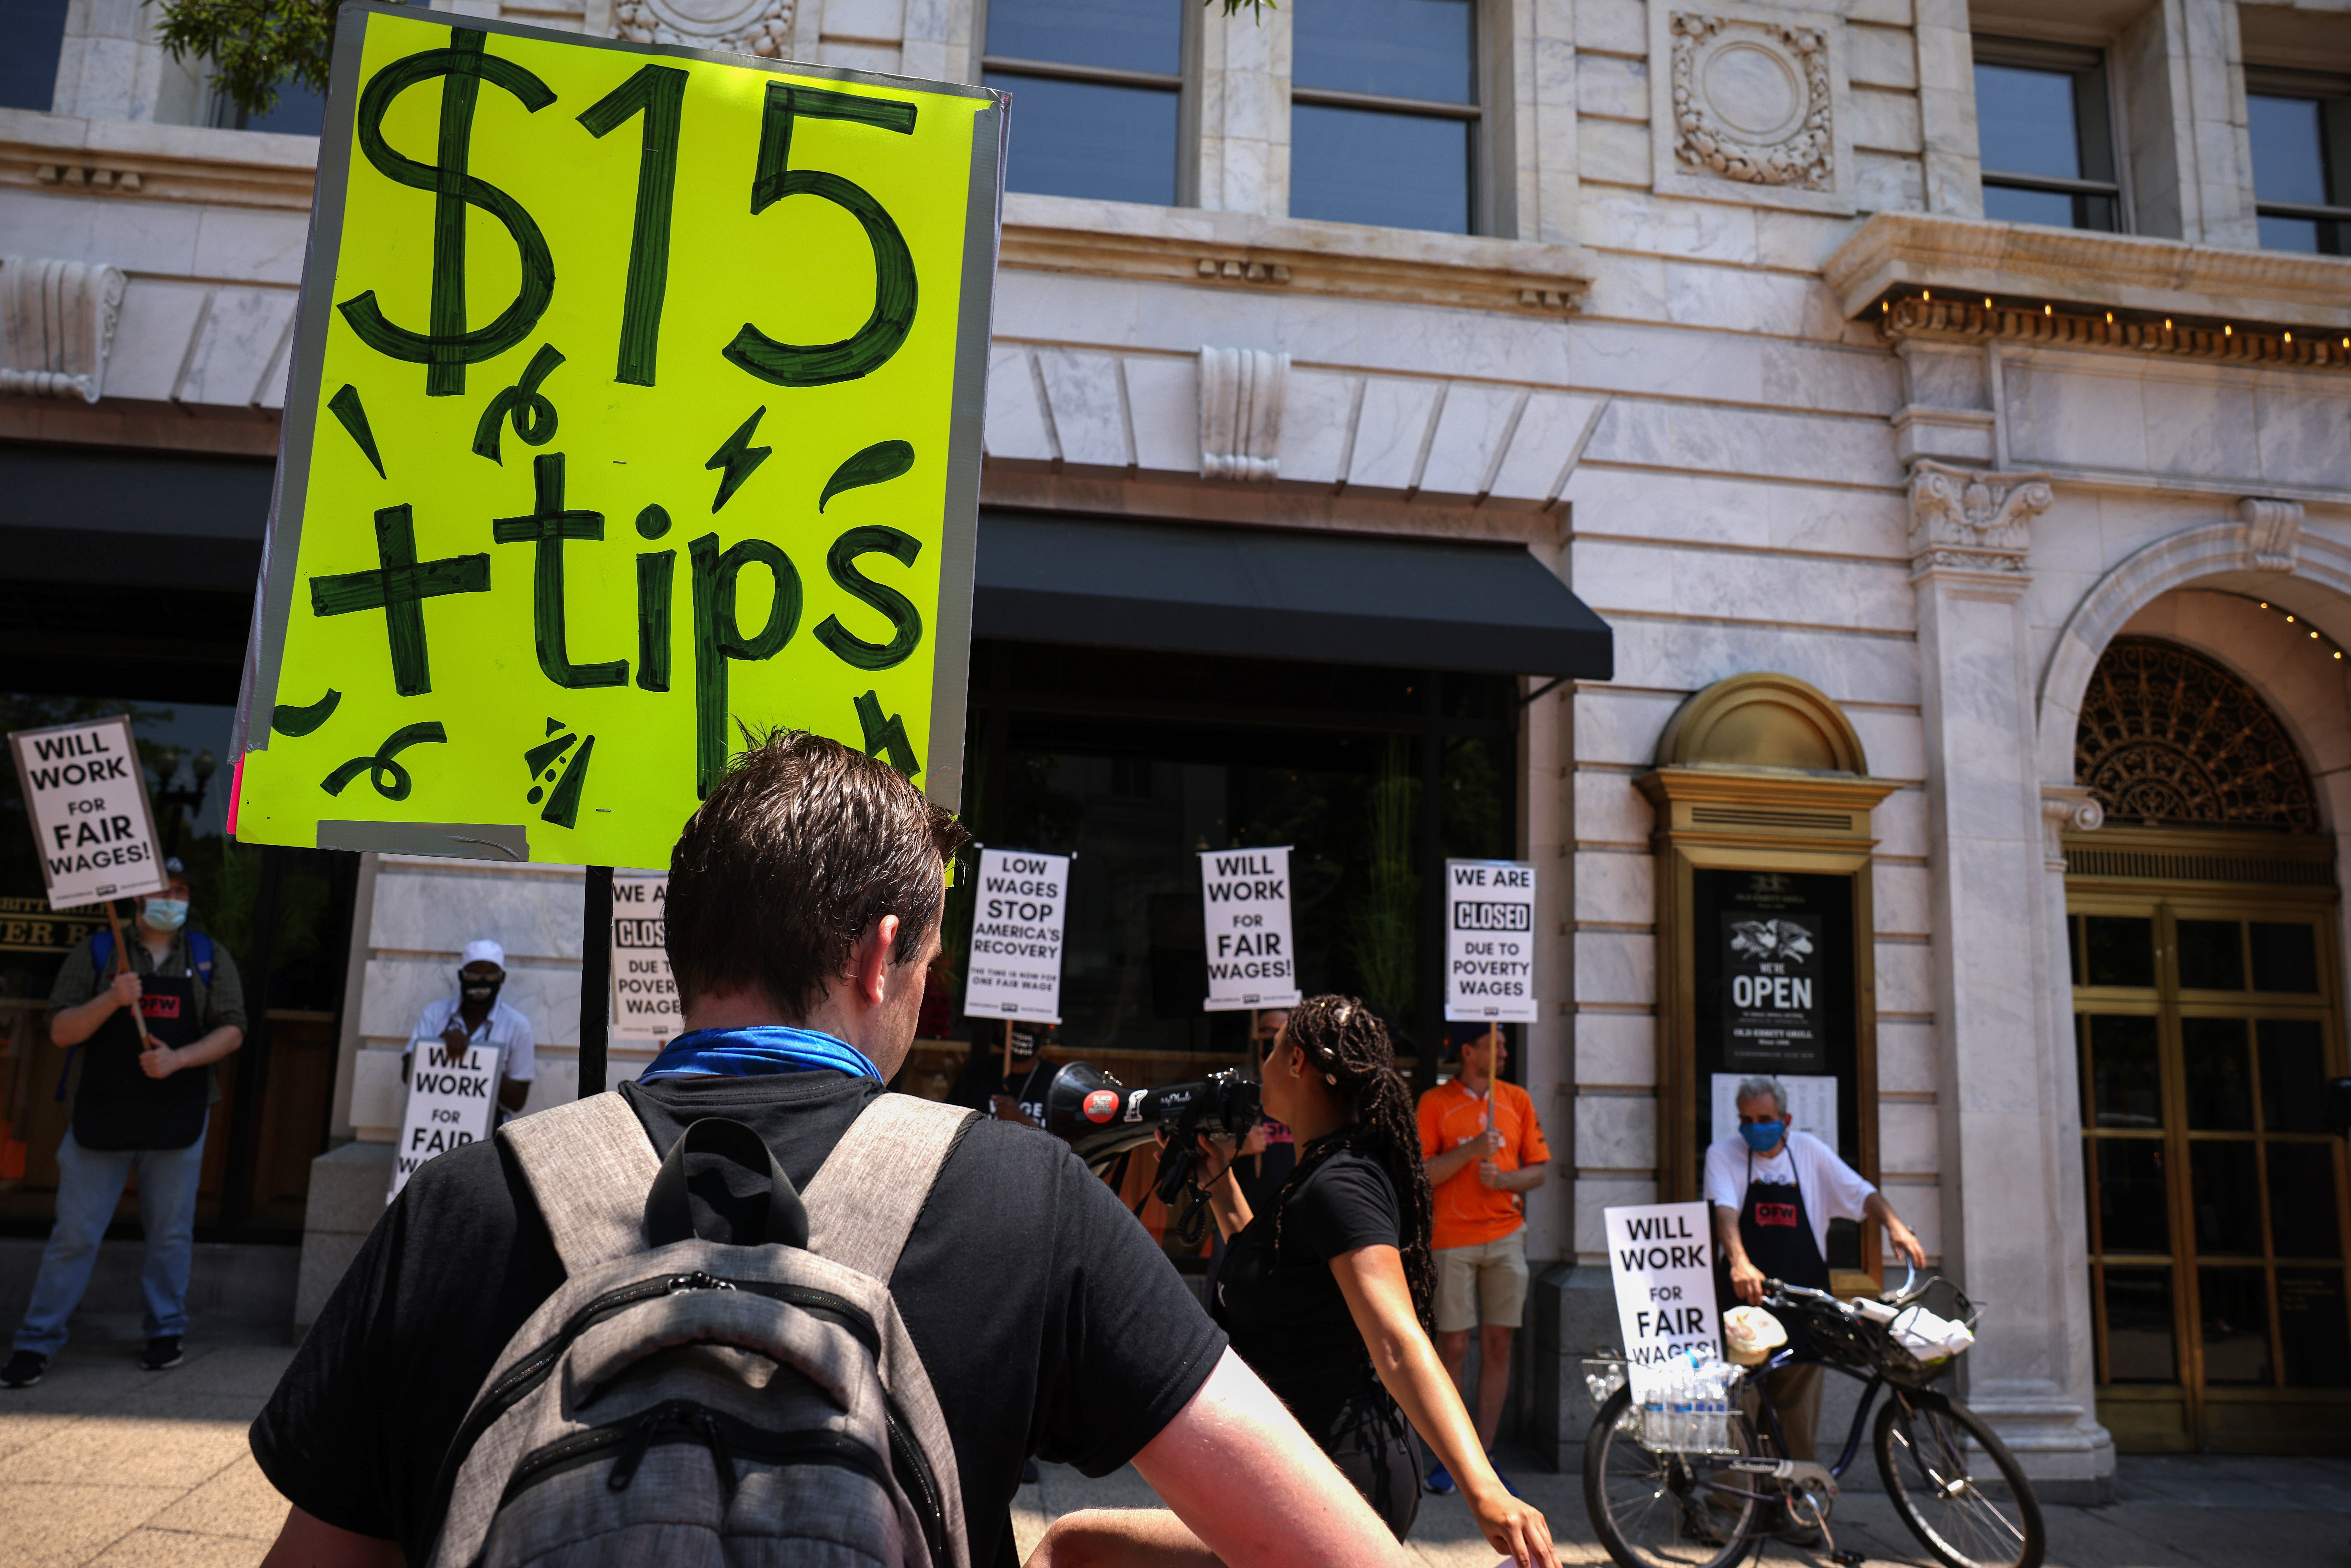 An activist holds a sign up outside Old Ebbitt Grill restaurant during a “Wage Strike” demonstration on May 26th, 2021 in Washington, DC. Delaware lawmakers have voted to give final approval to raising the state’s minimum wage to $15 an hour.